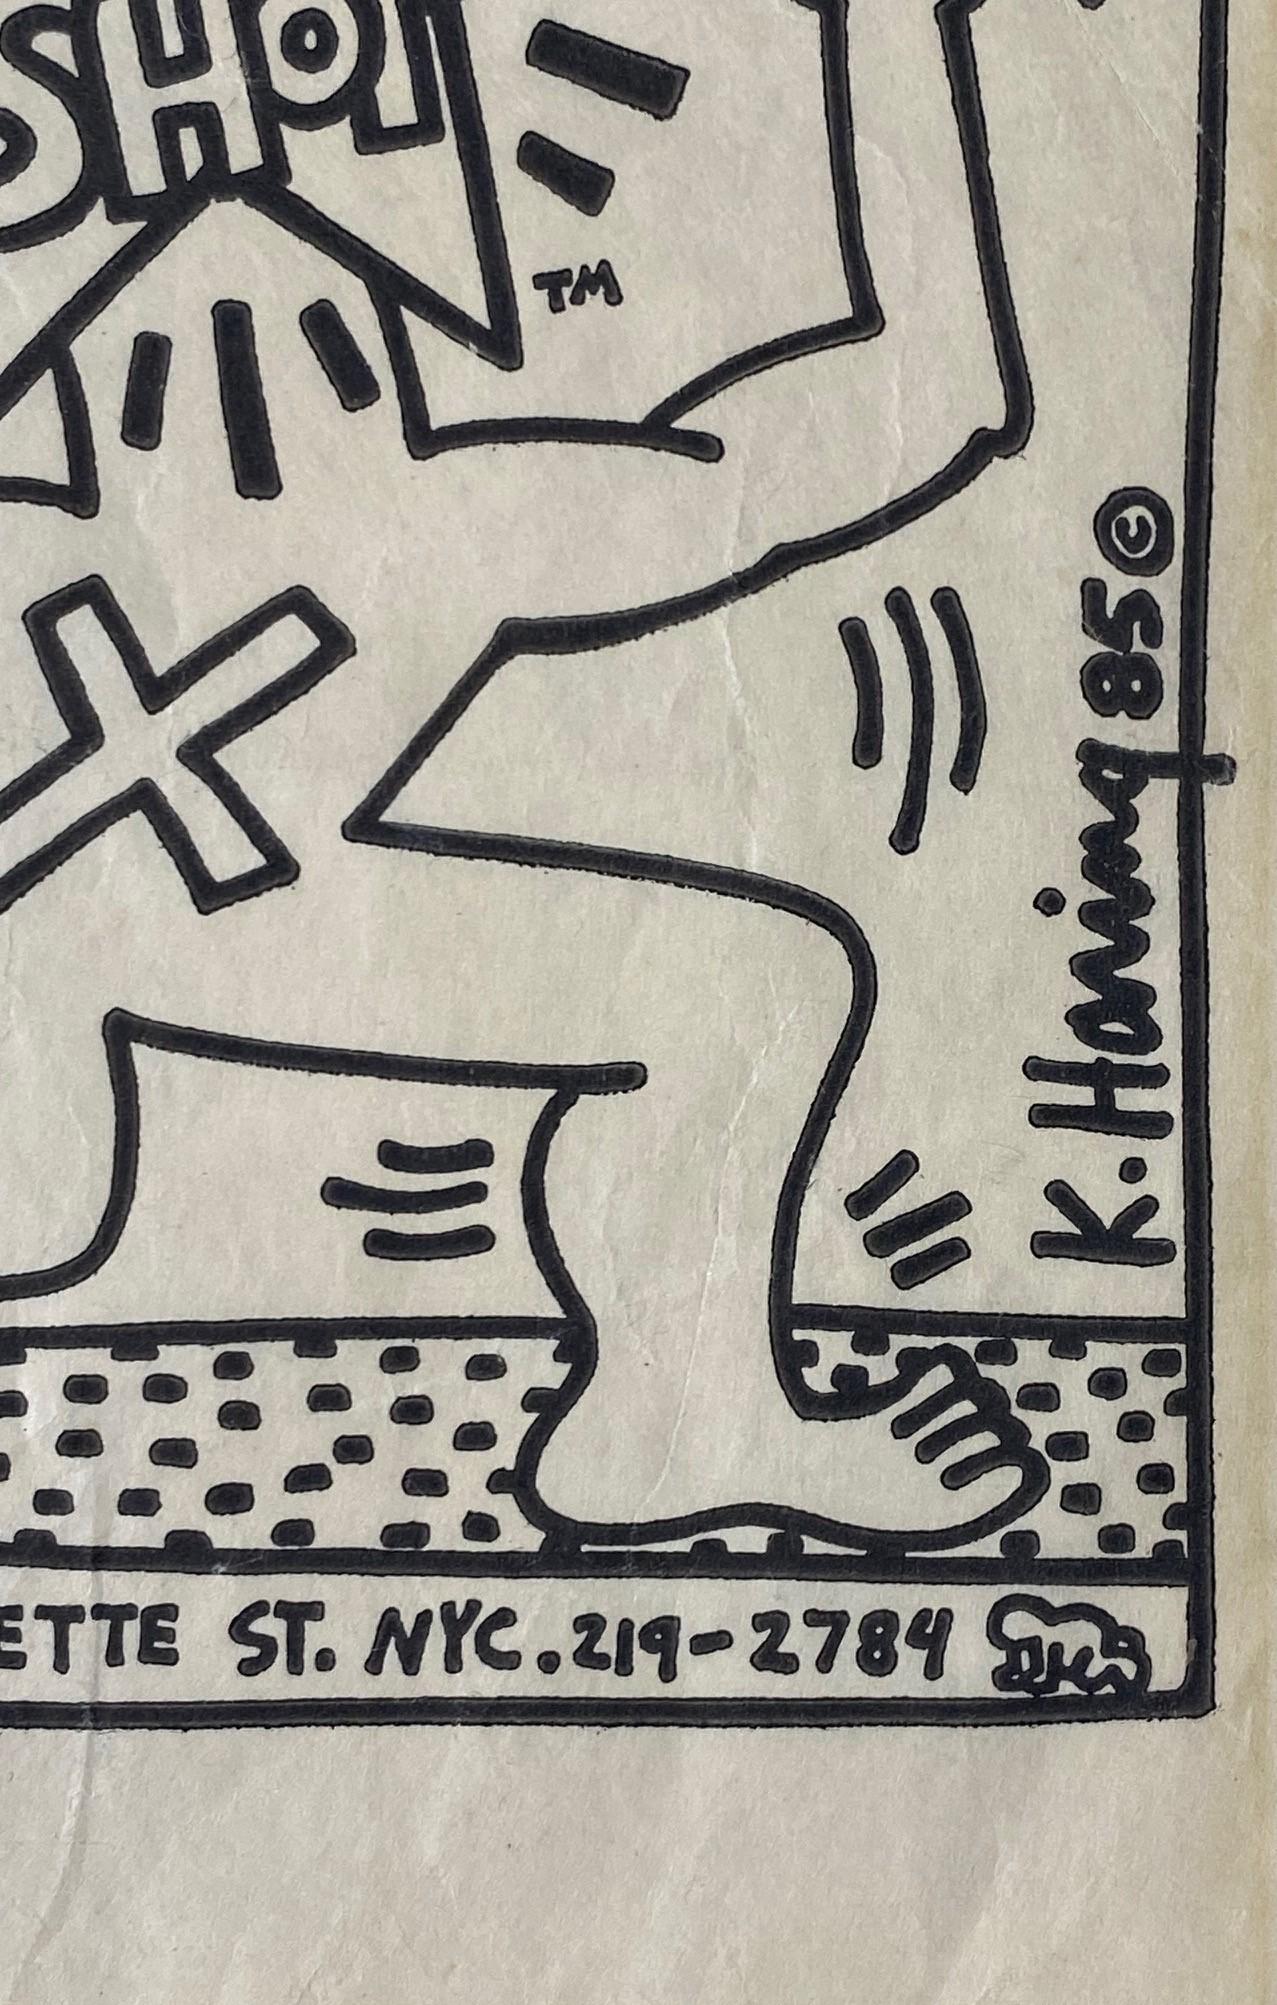 Keith Haring Original New York City Pop Shop Lithograph Bag With Bonus, 1980s In Good Condition For Sale In Studio City, CA